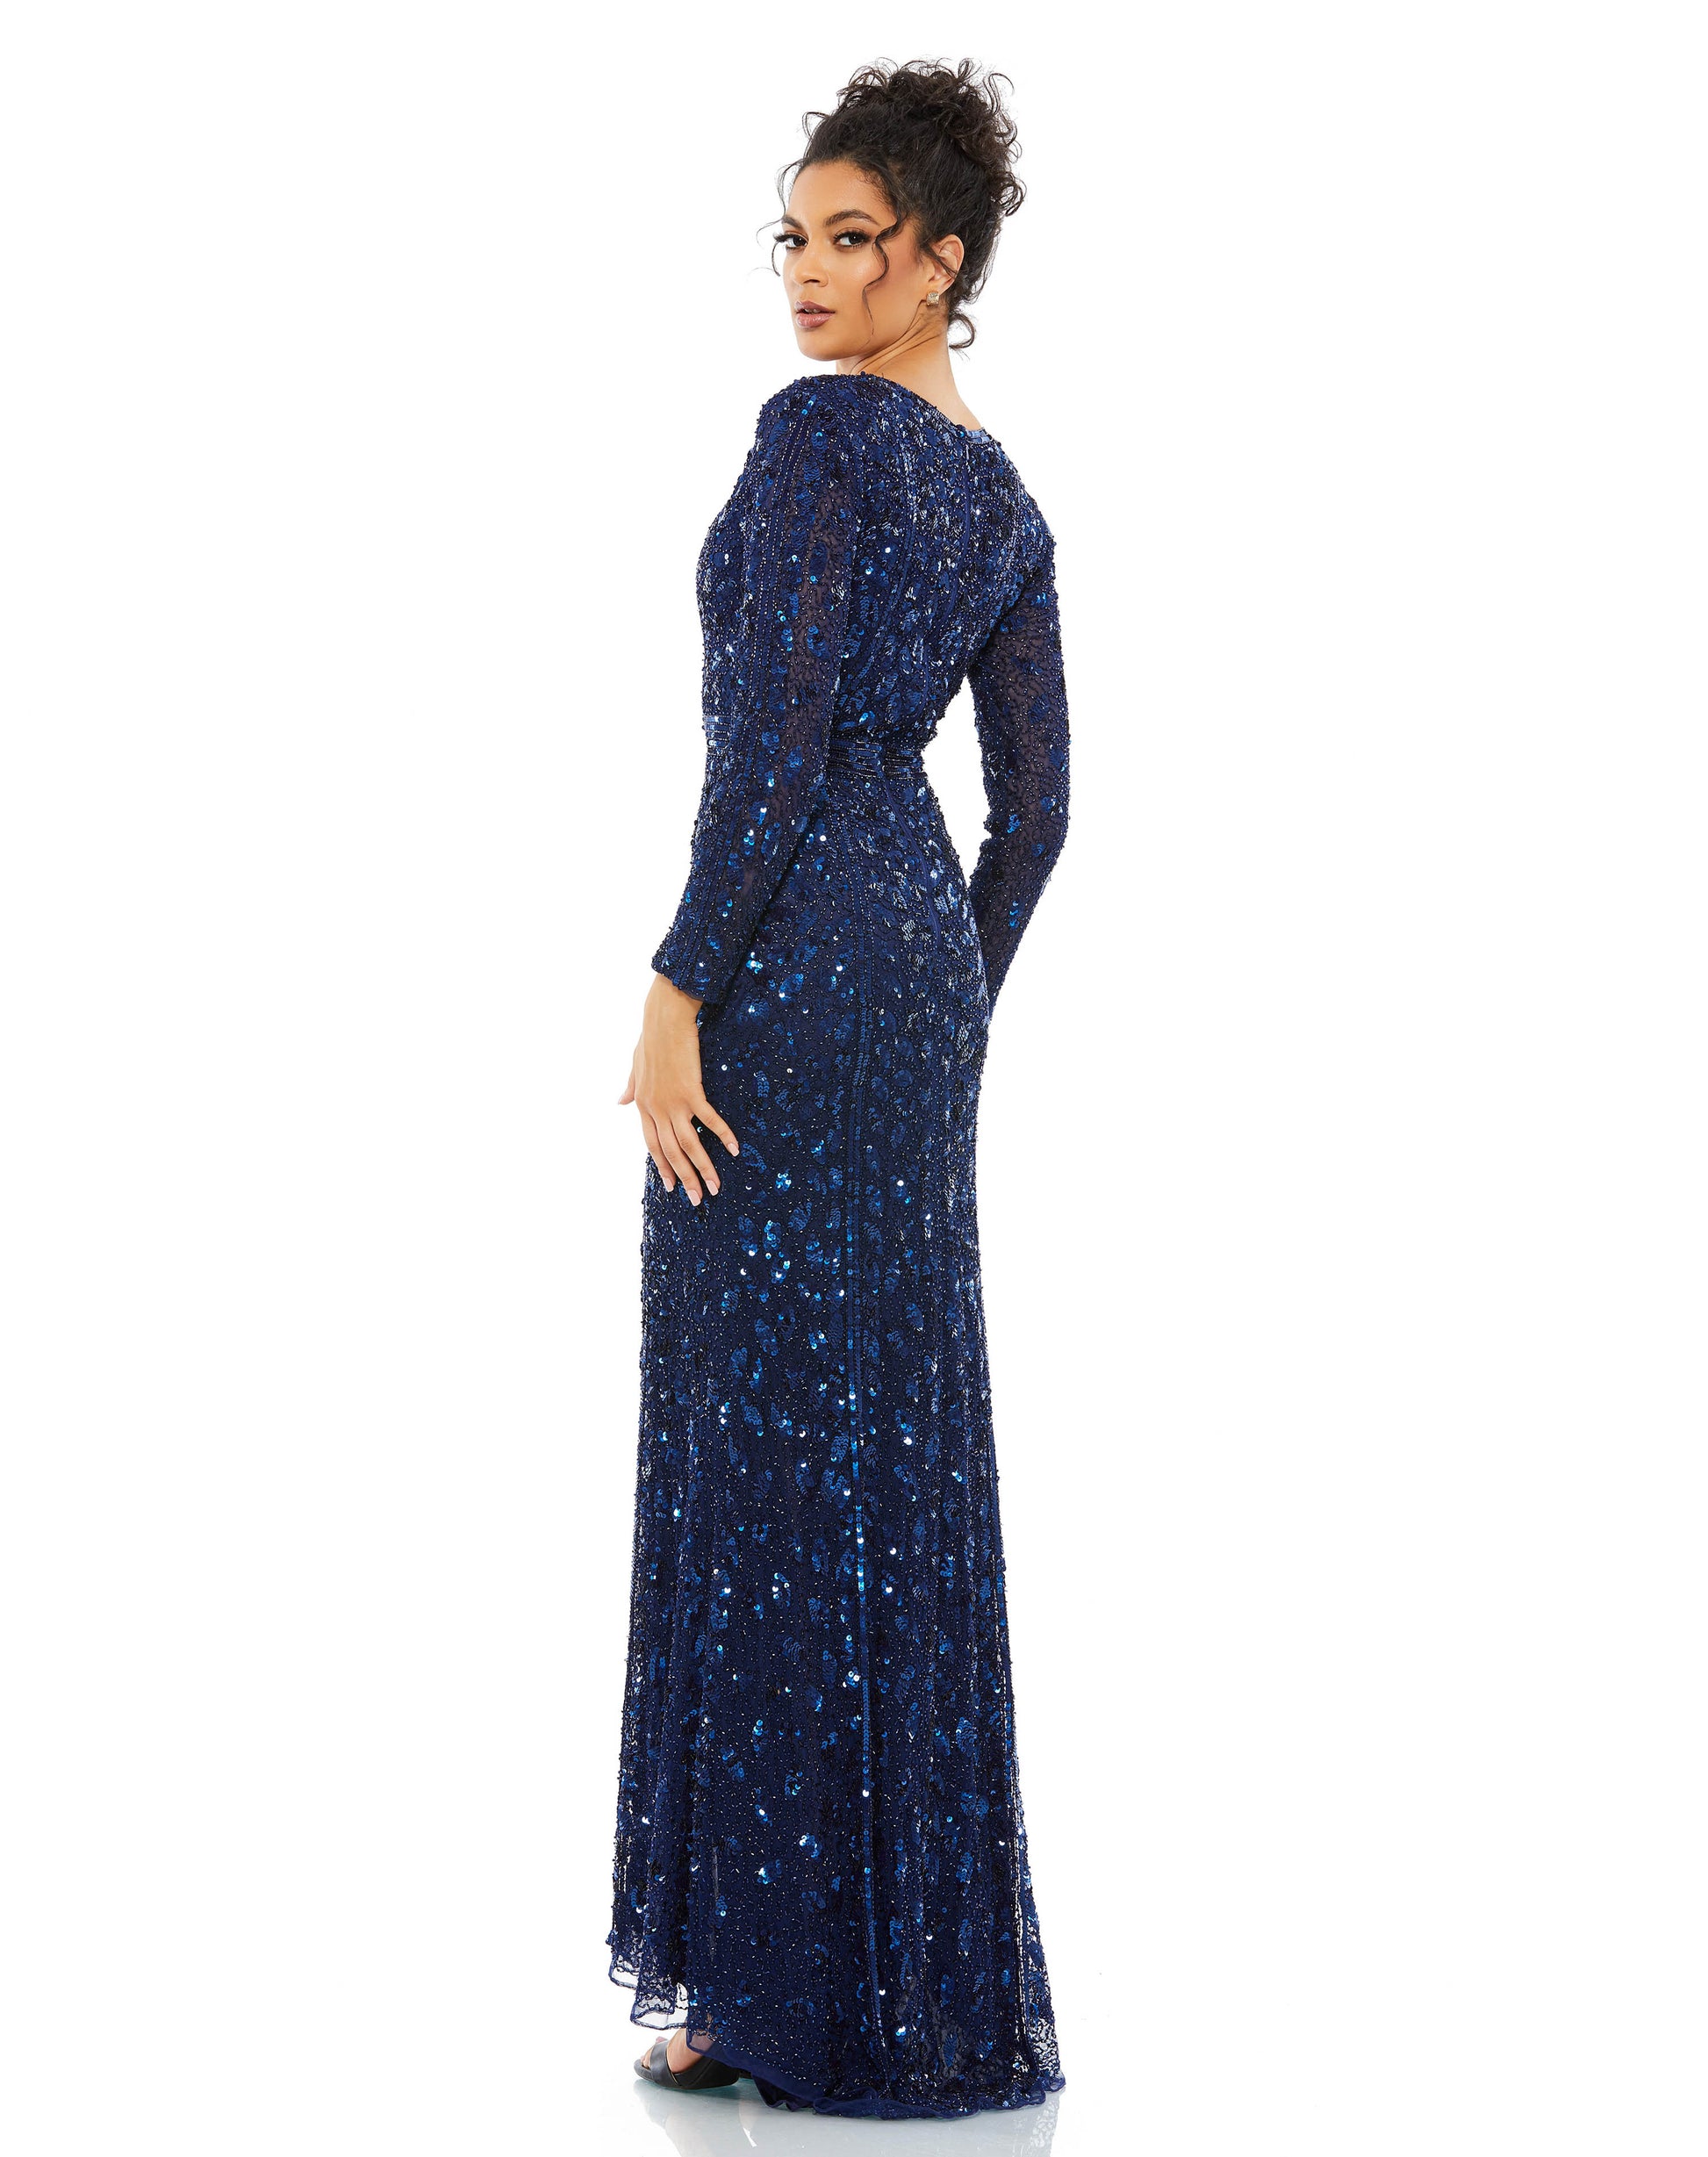 Fully embellished evening gown cut with a dramatic plunge neckline, thigh-high front slit, and sequin accents at the natural waist Mac Duggal Back Zipper 100% Polyester Long Sleeve Full Length Thigh-high slit V-Neck Style #5002